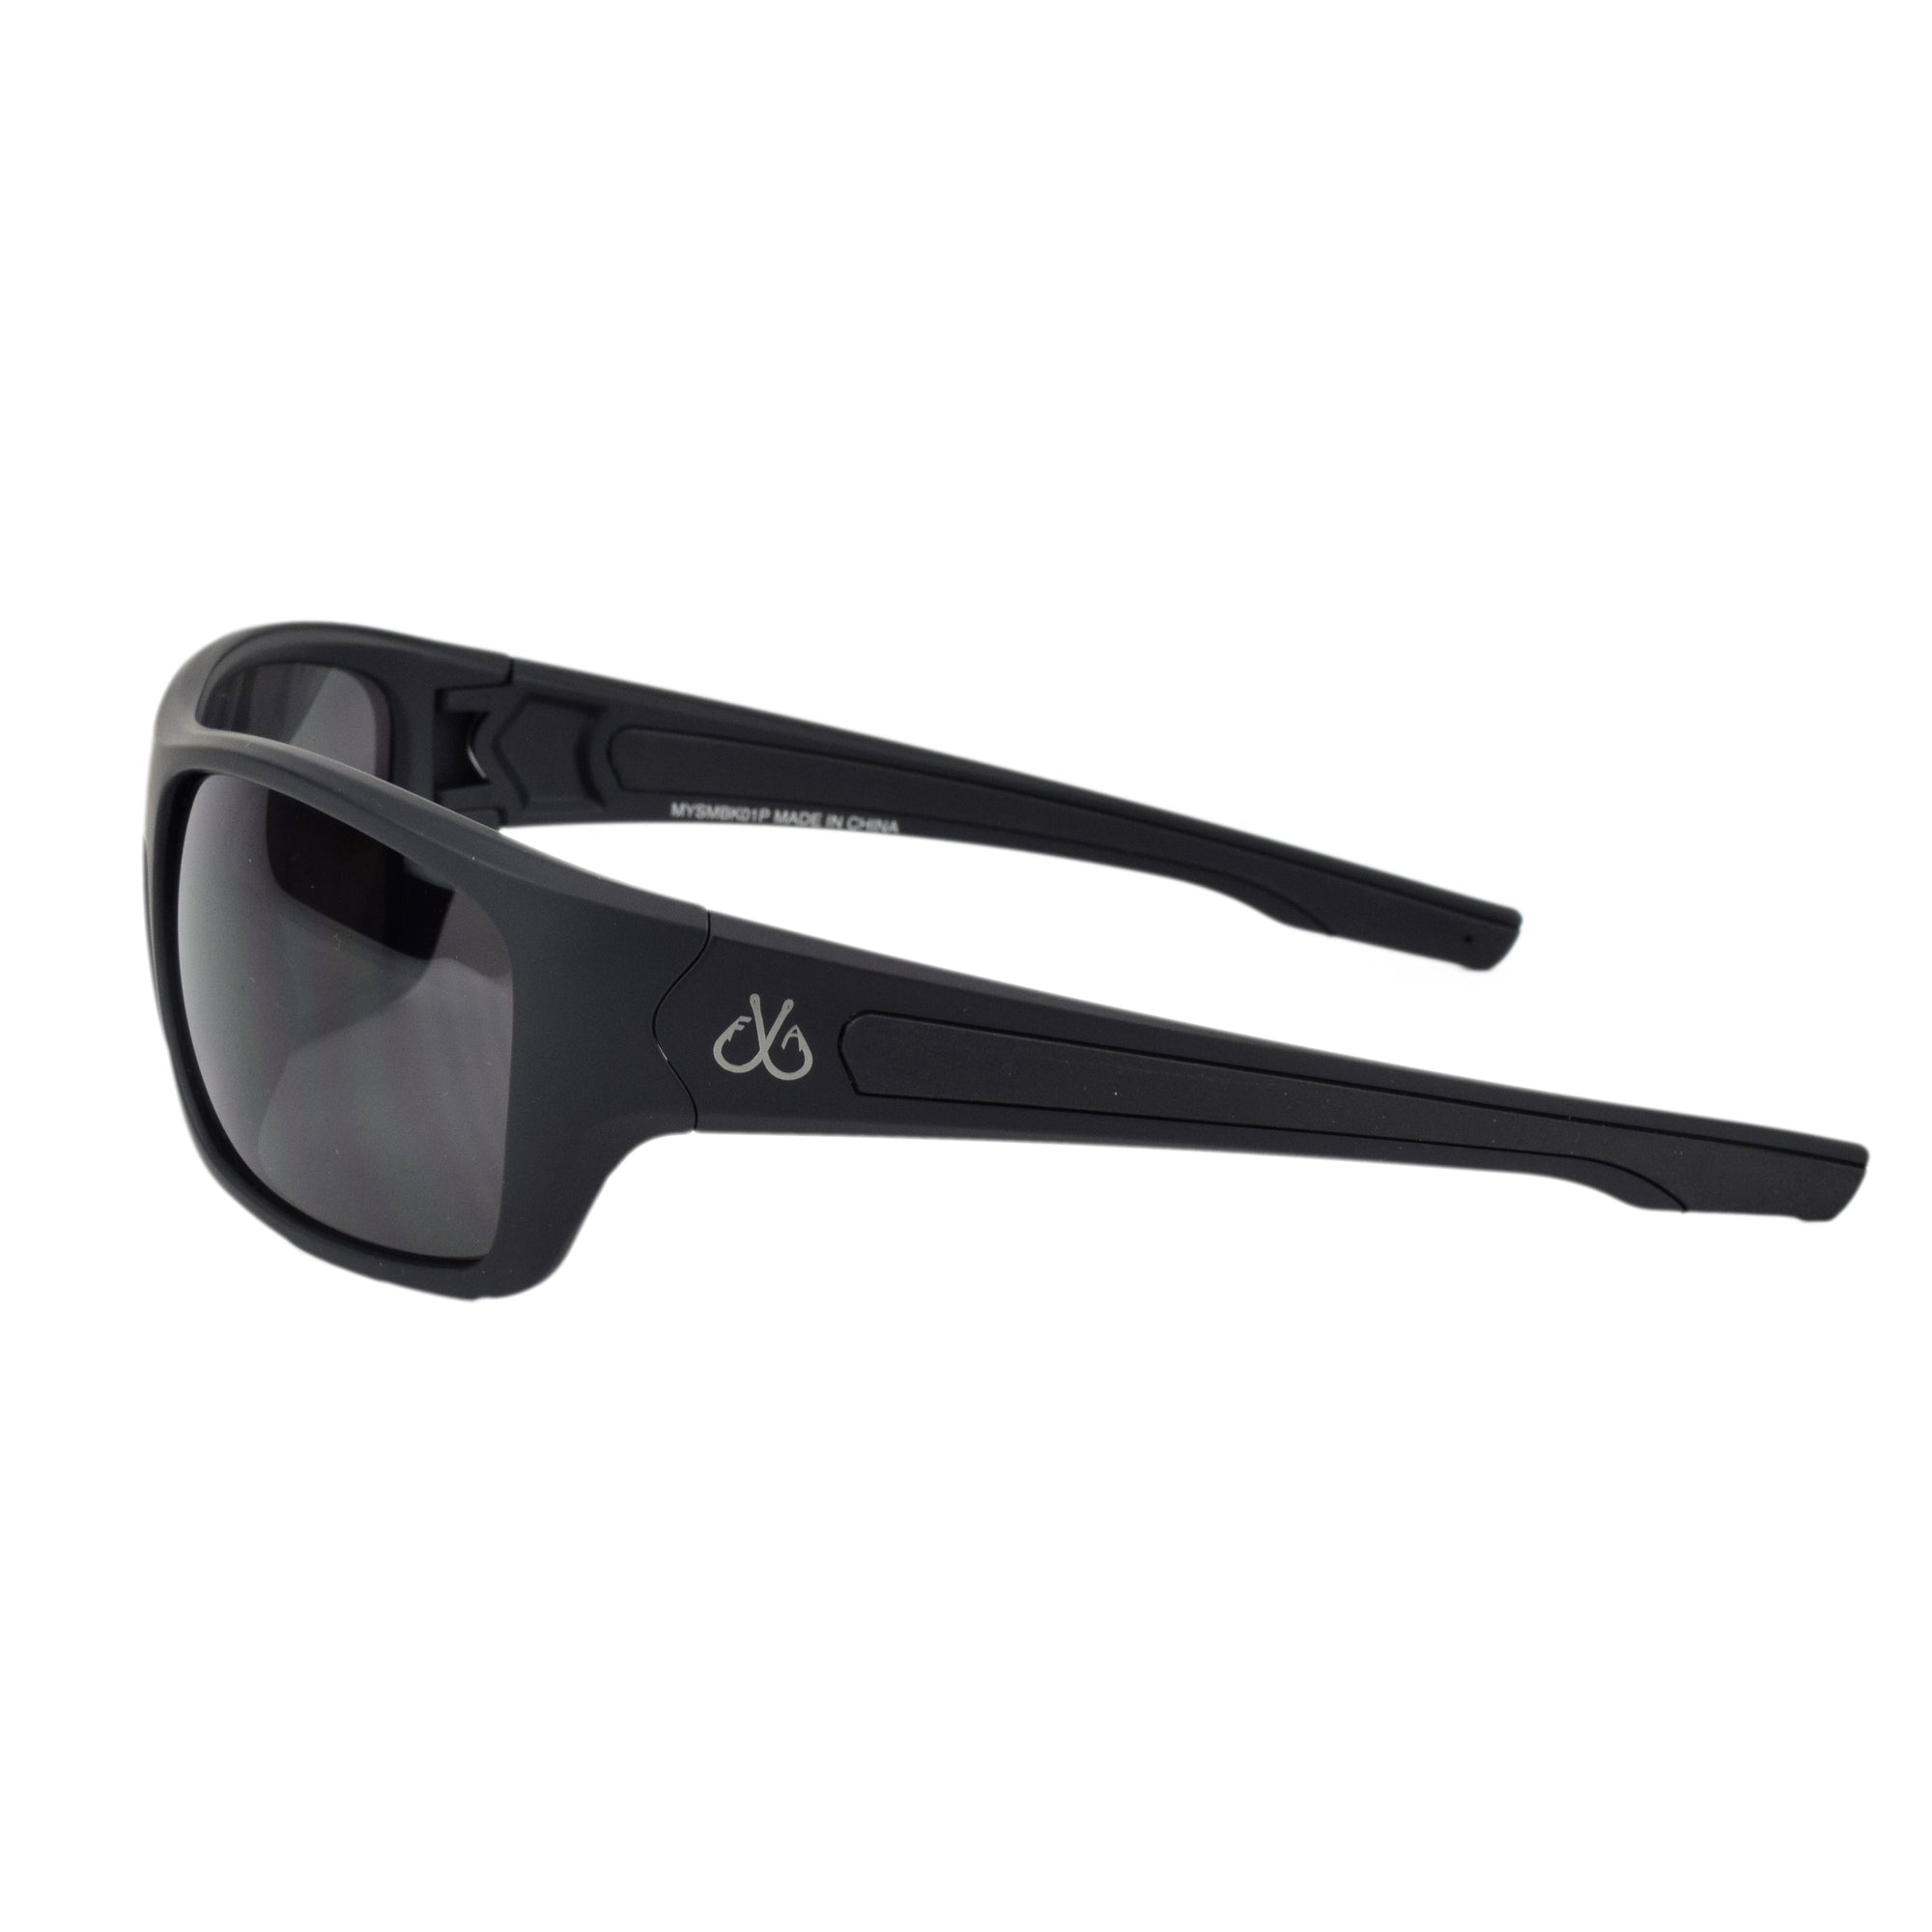 Mystic Polarized Sunglasses - Filthy Anglers